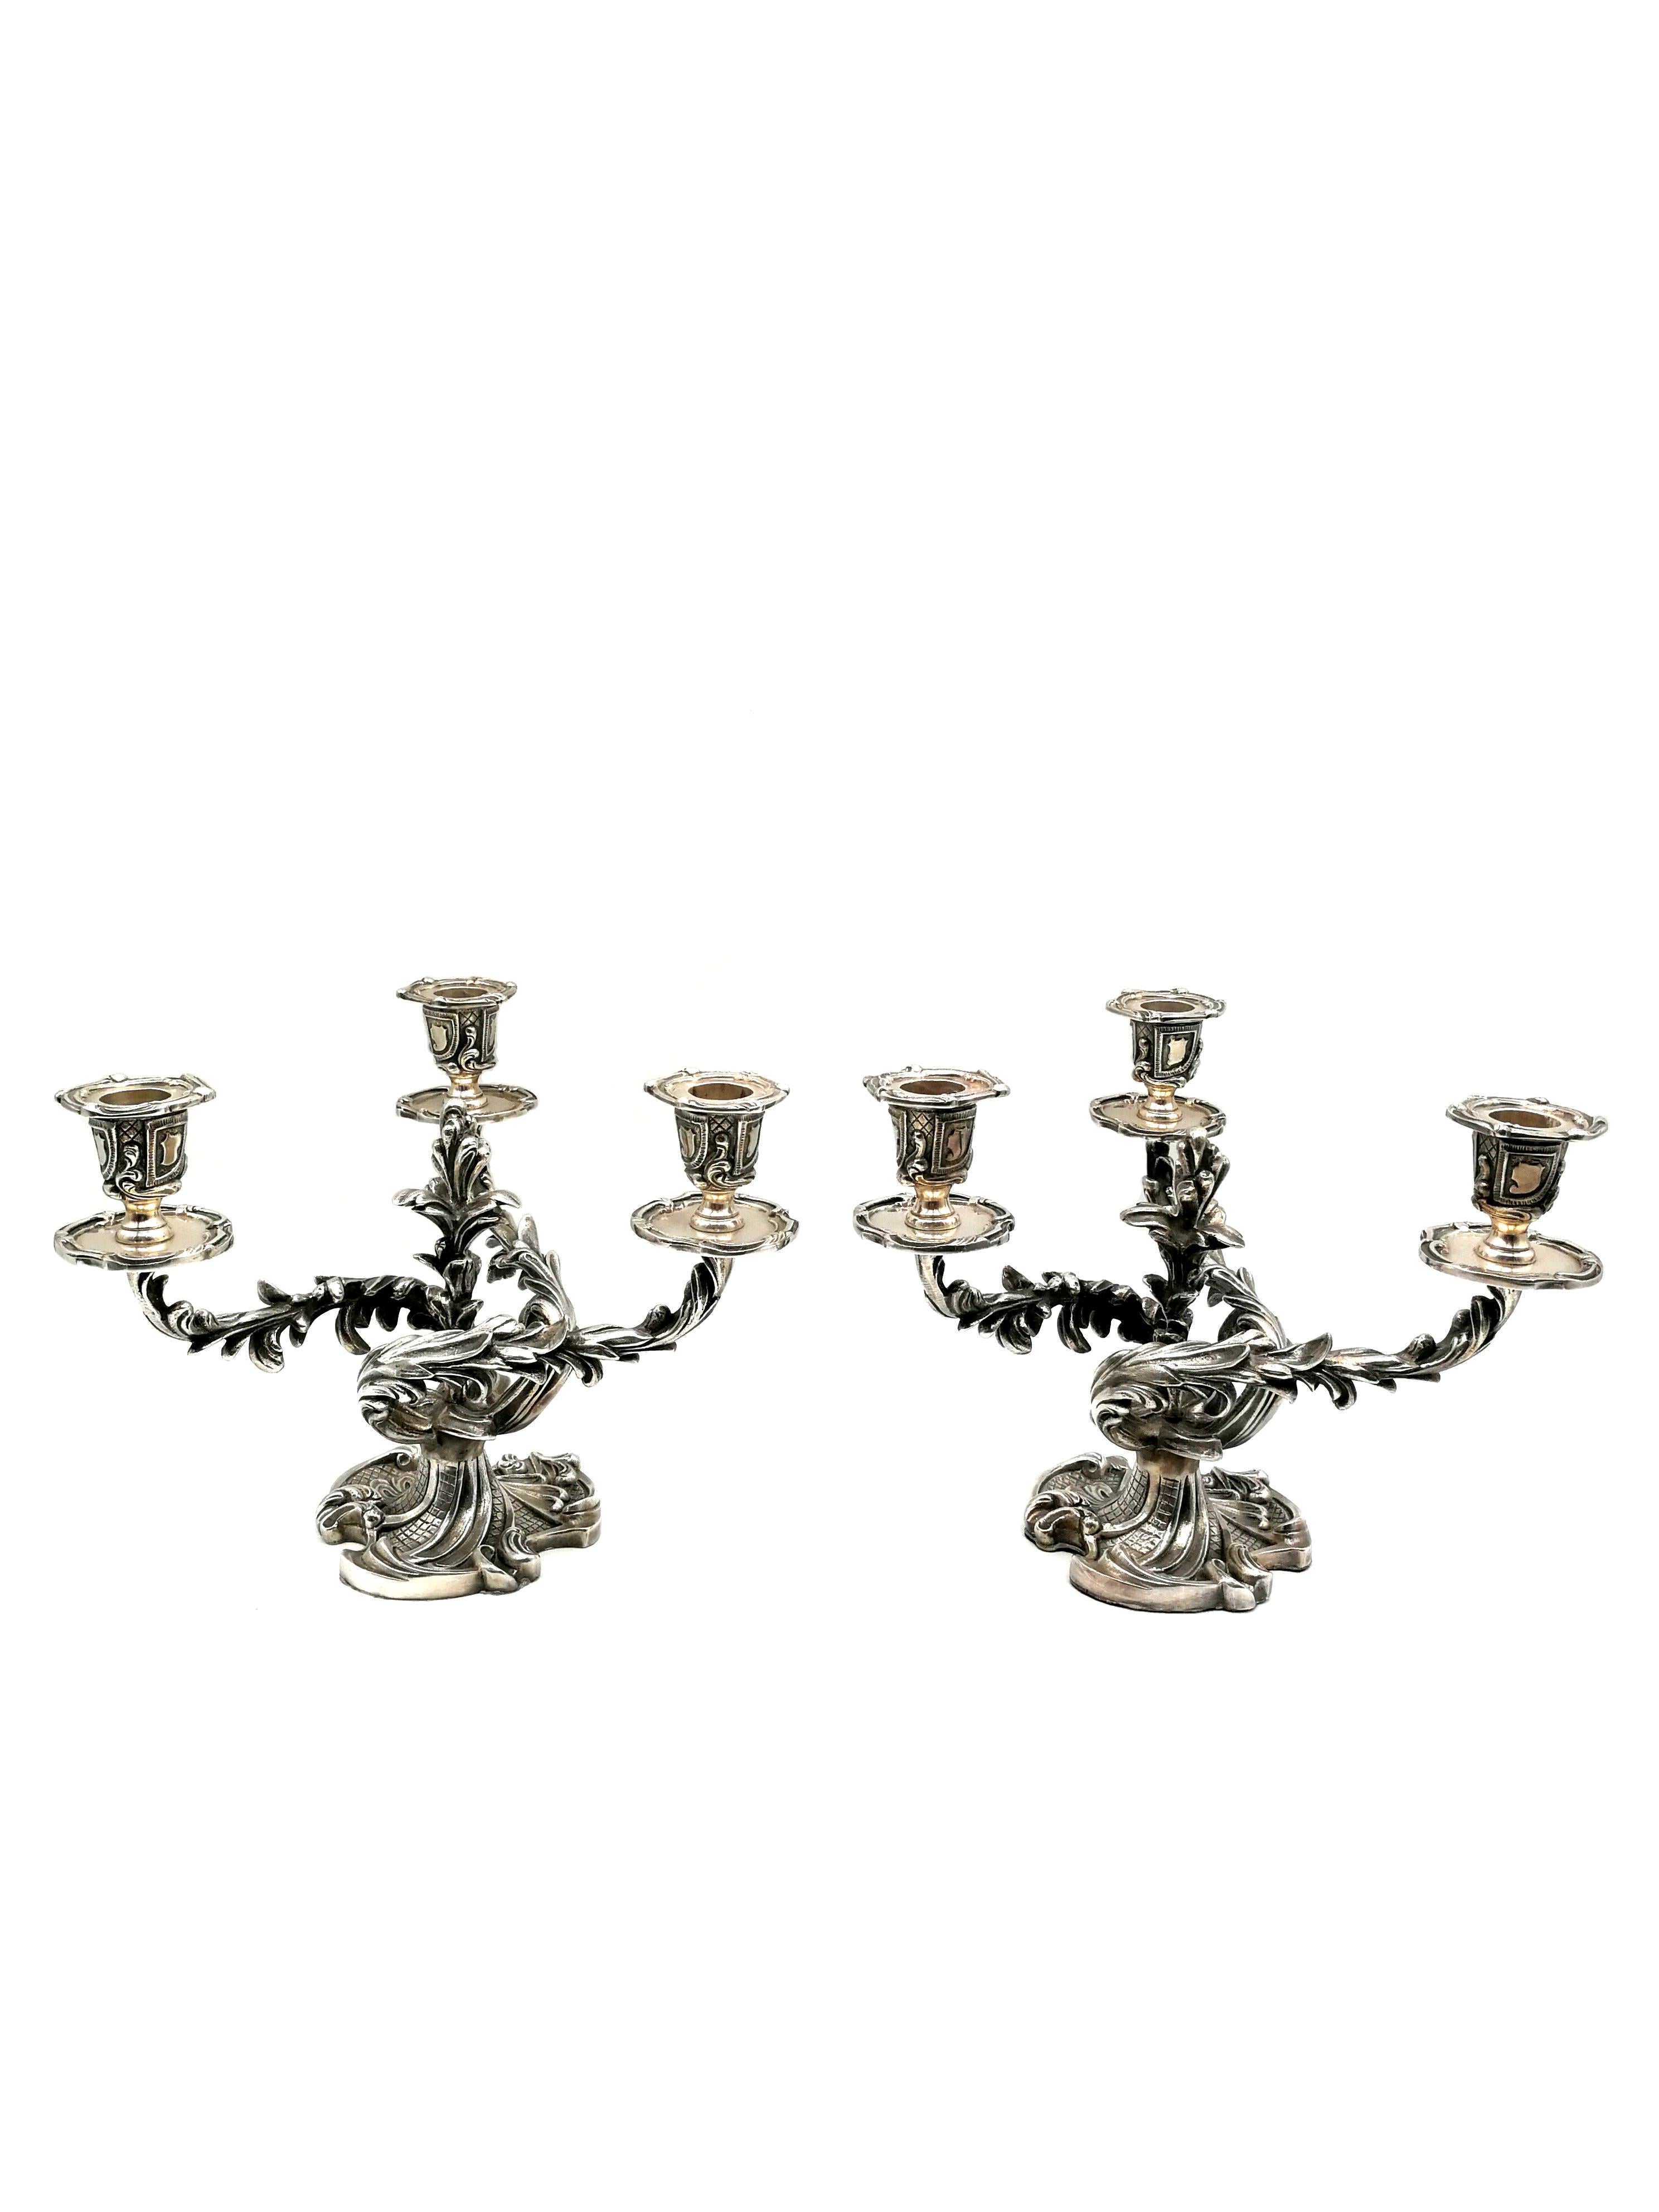 A stunning rare Belgian pair of silver plated candelabra in the louis XV style. Stamped with the manufacturers’ hallmark “Wiskemann”, the Swiss Cross and the Arabic numeral “20” along and an etched series of numbers. This is a cast of pure silver